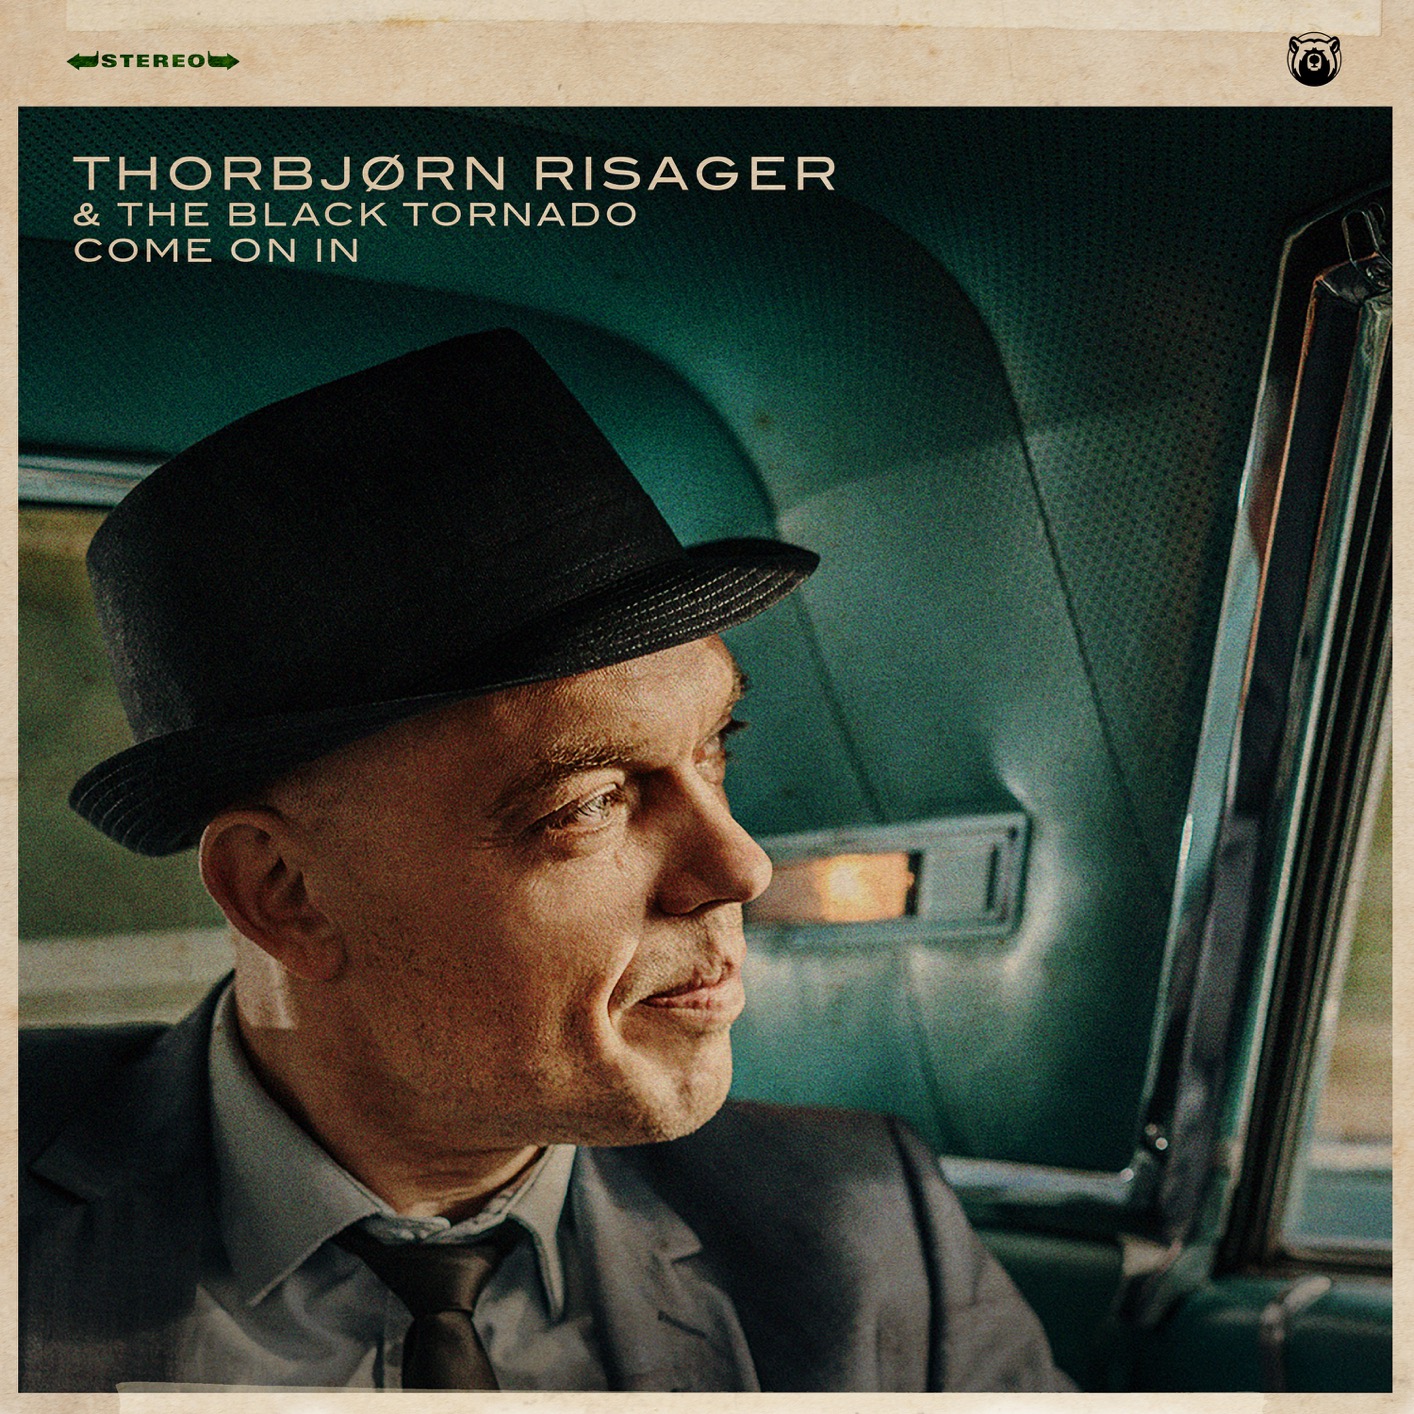 Thorbjorn Risager & The Black Tornado – Come On In (2020) [FLAC 24bit/48kHz]